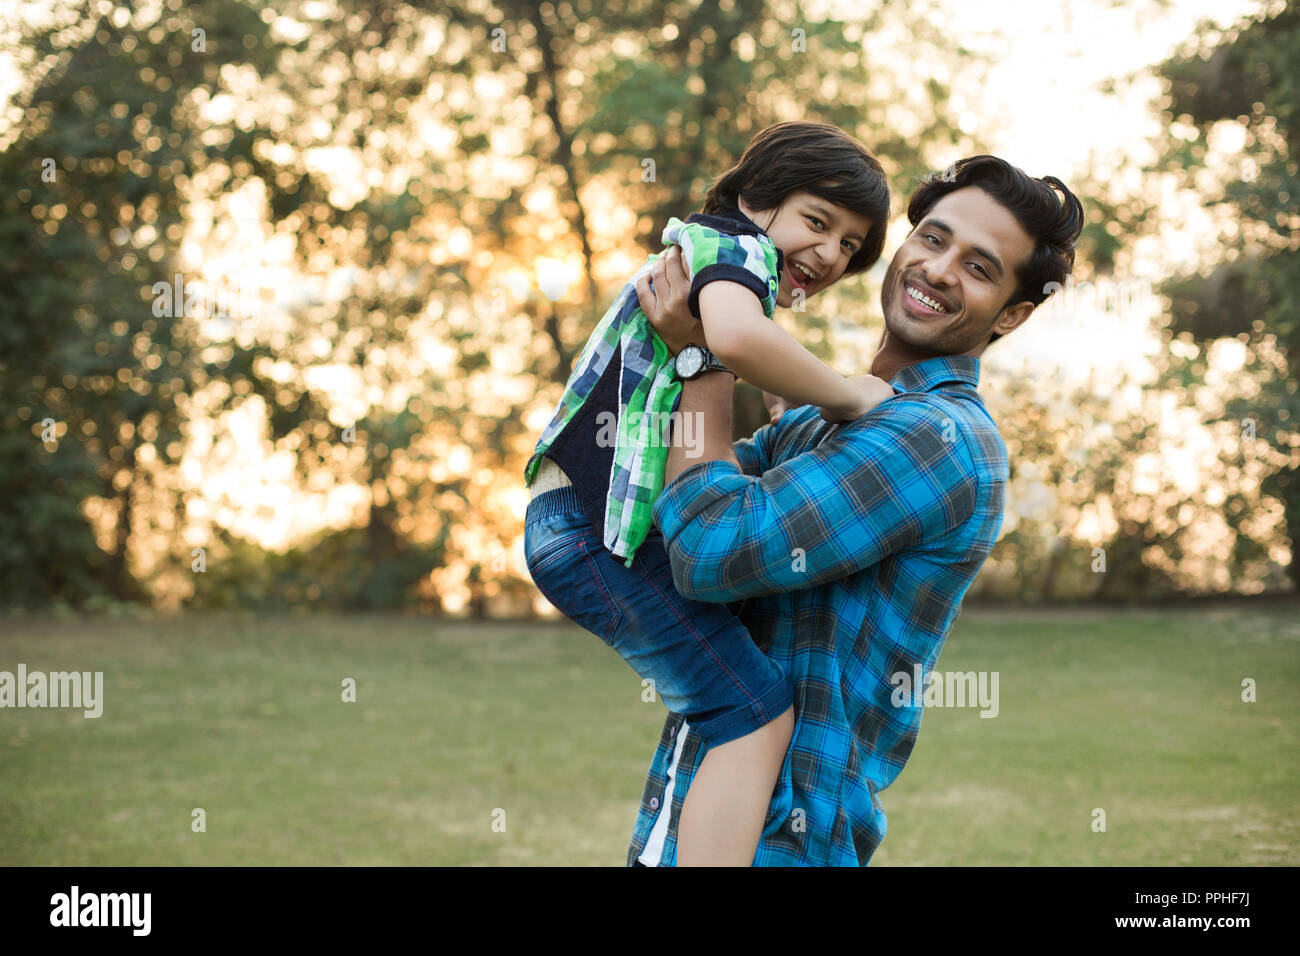 Smiling man playing with his happy son by lifting him in the park. Stock Photo